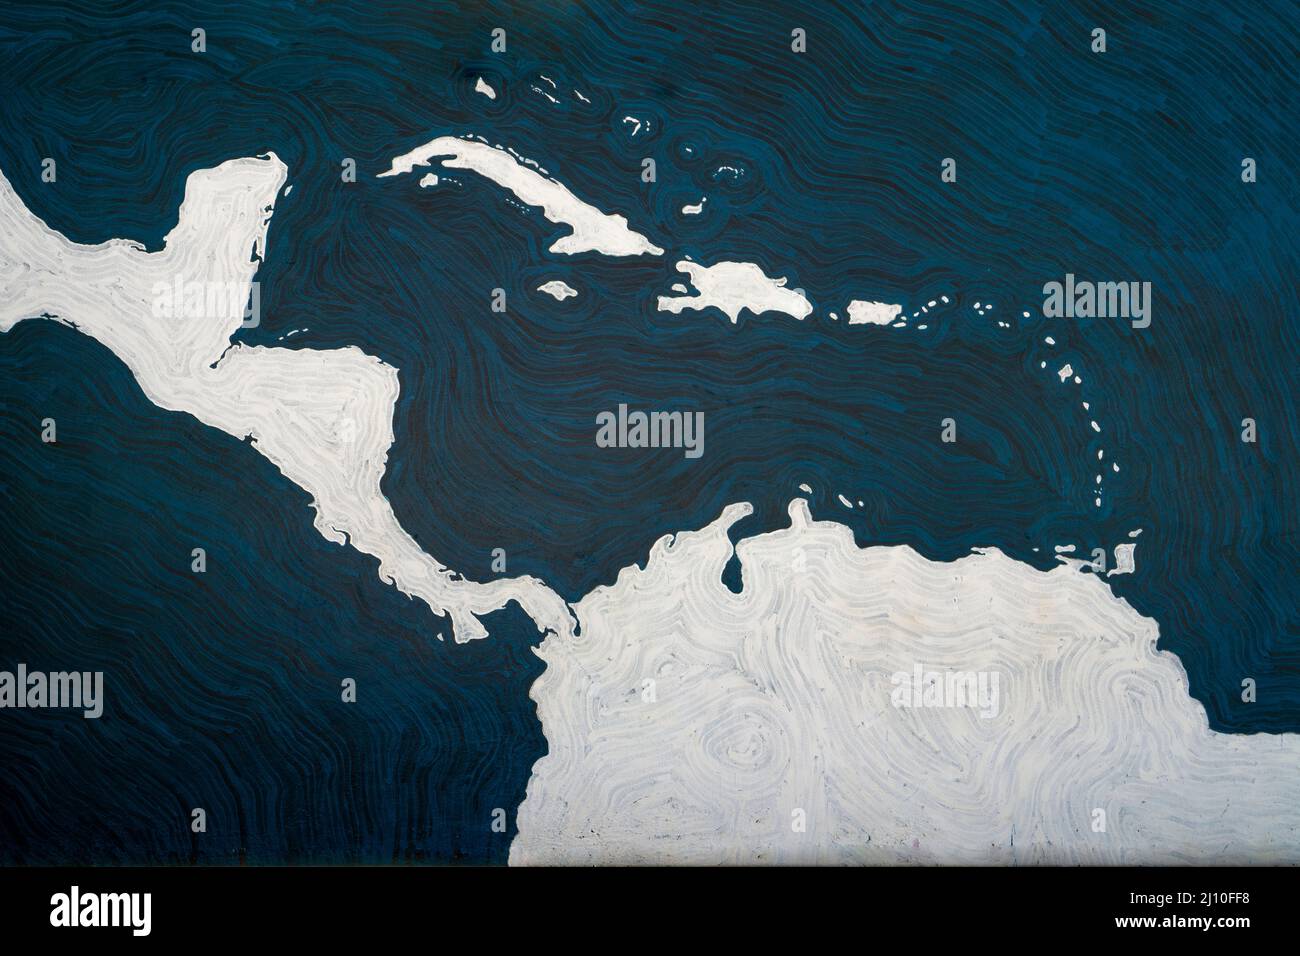 Silhouette of Central America, Caribbean and part of South America map. Simple blue and white lined map Stock Photo